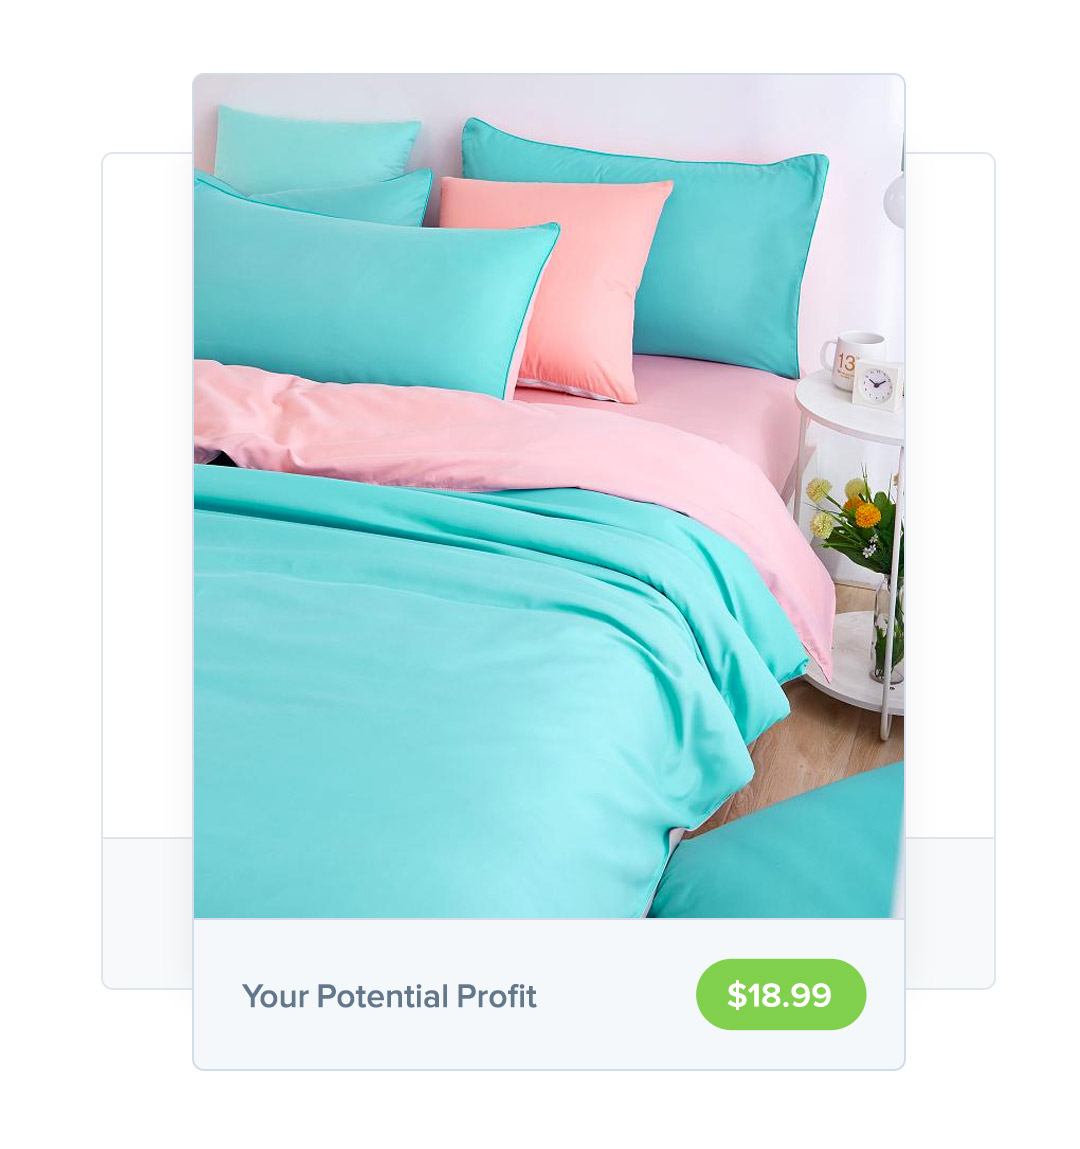  sell bedding online